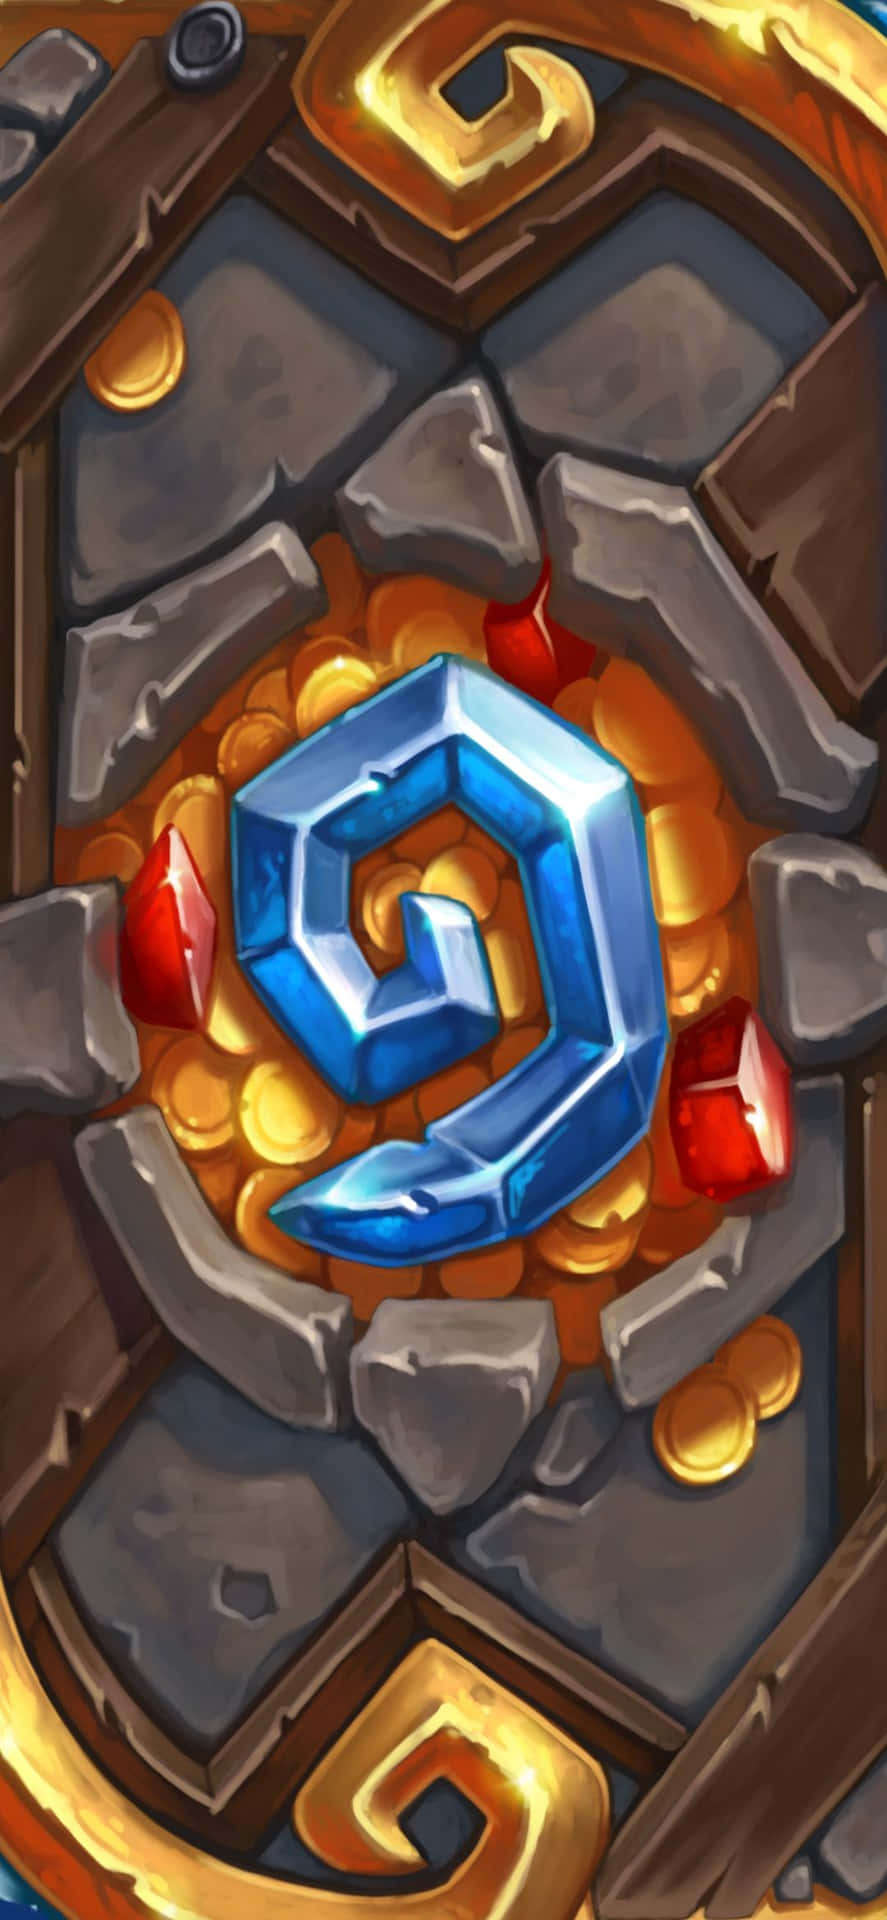 Hearthstone - A Gold And Diamond Icon